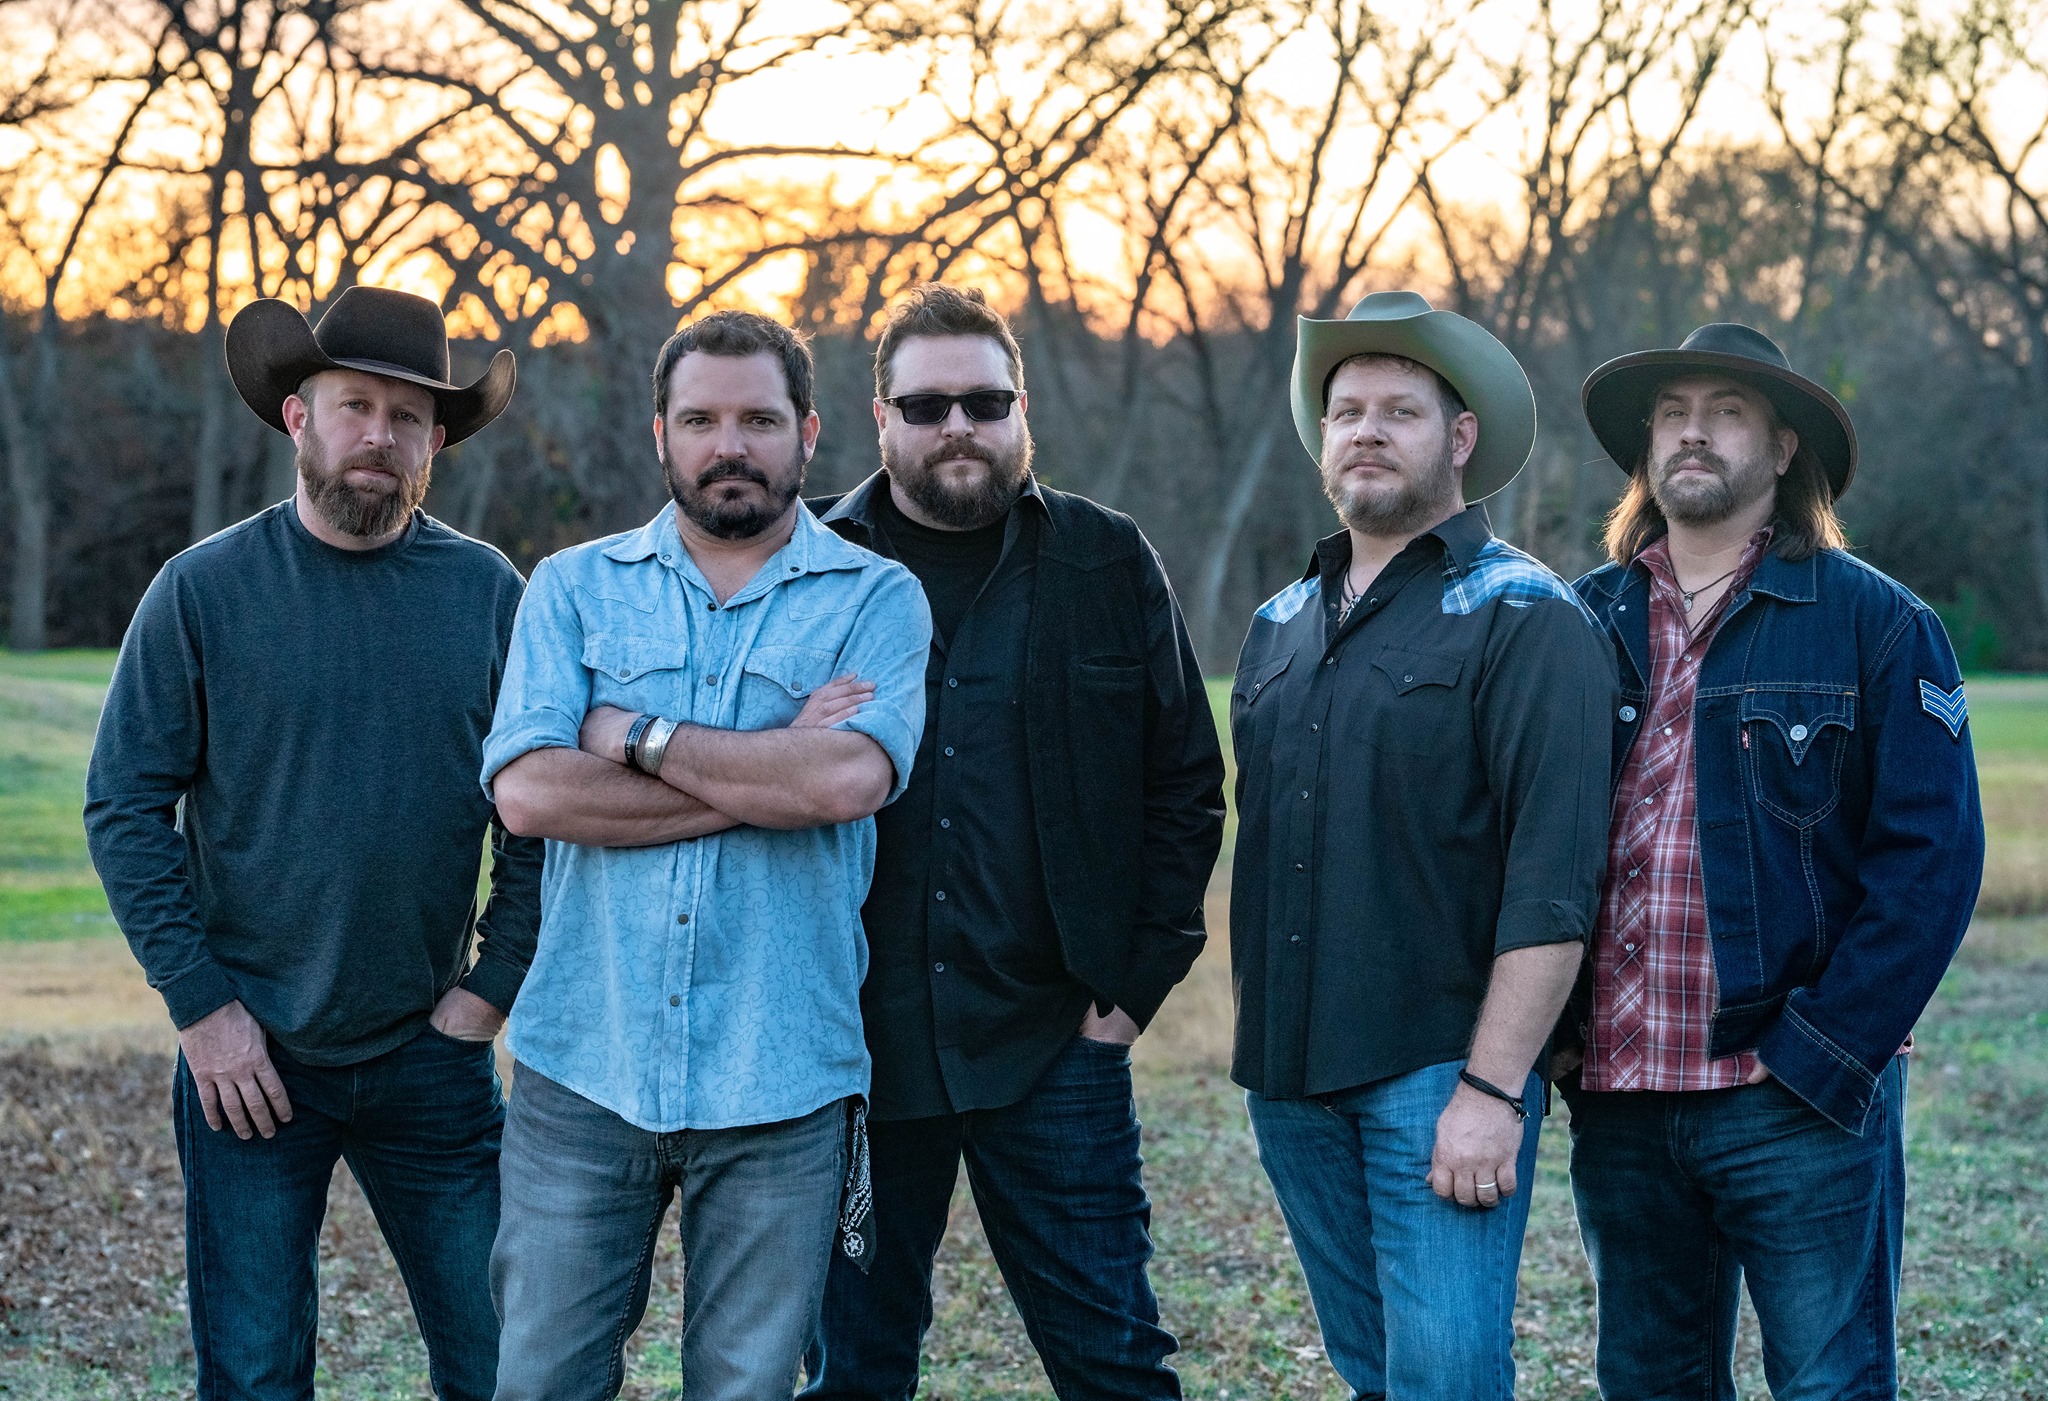 Reckless Kelly Explains the Writing Behind ‘American Jackpot’ and ‘American Girls’